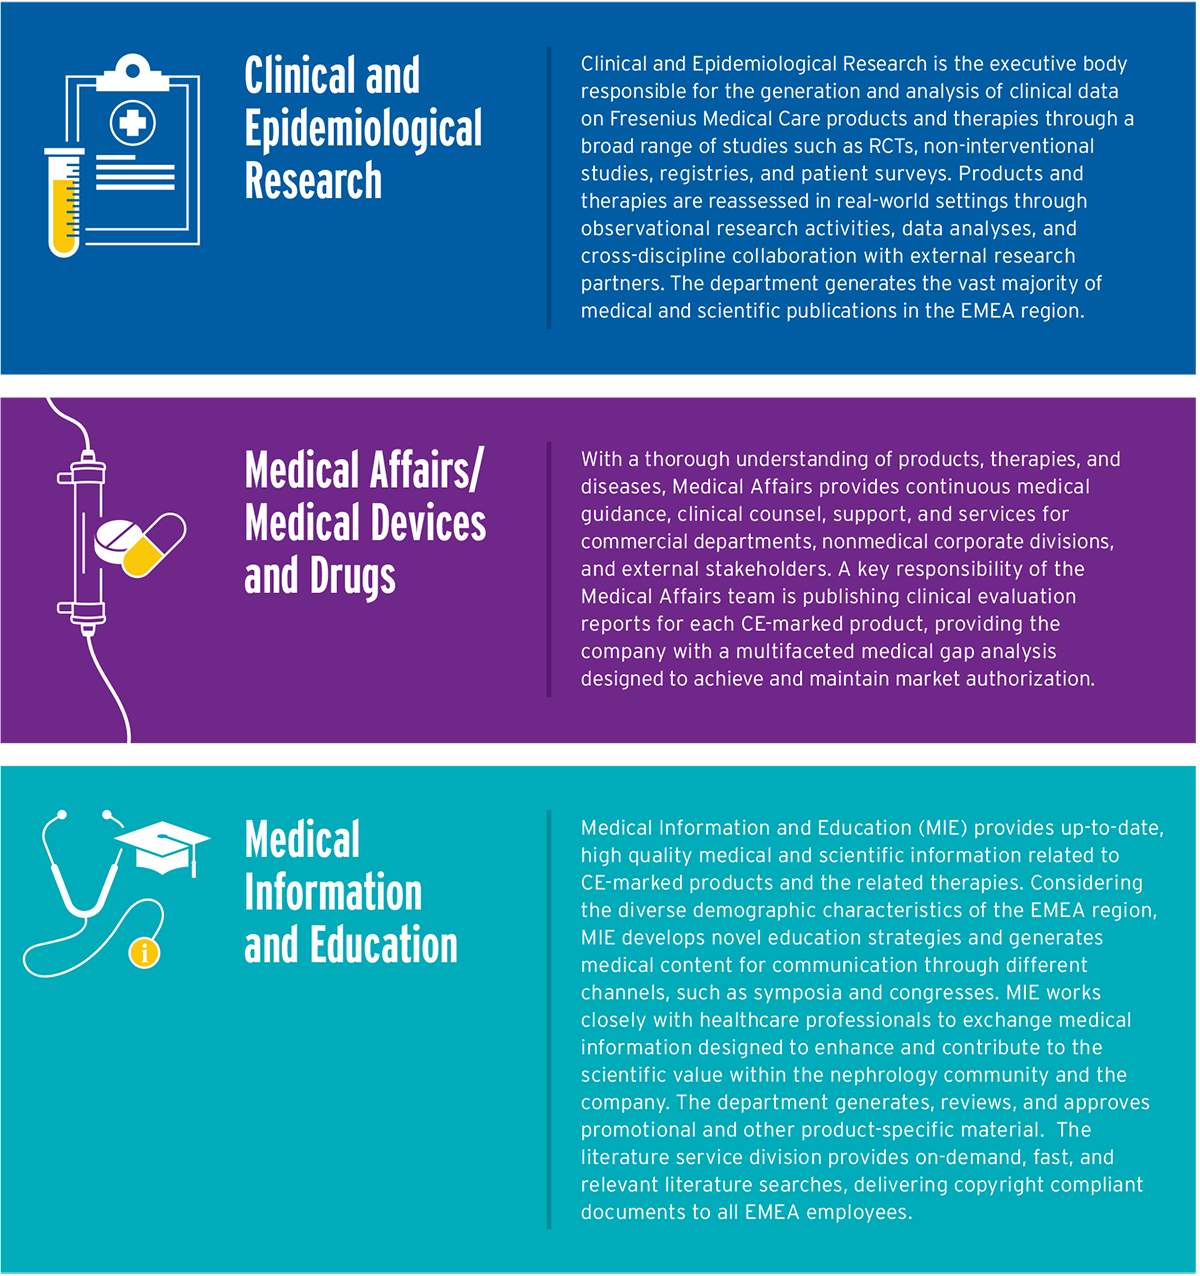 Descriptions of clinical and epidemiological research, medical affairs/meidcal devices and drugs, and medical information and education in graphic 